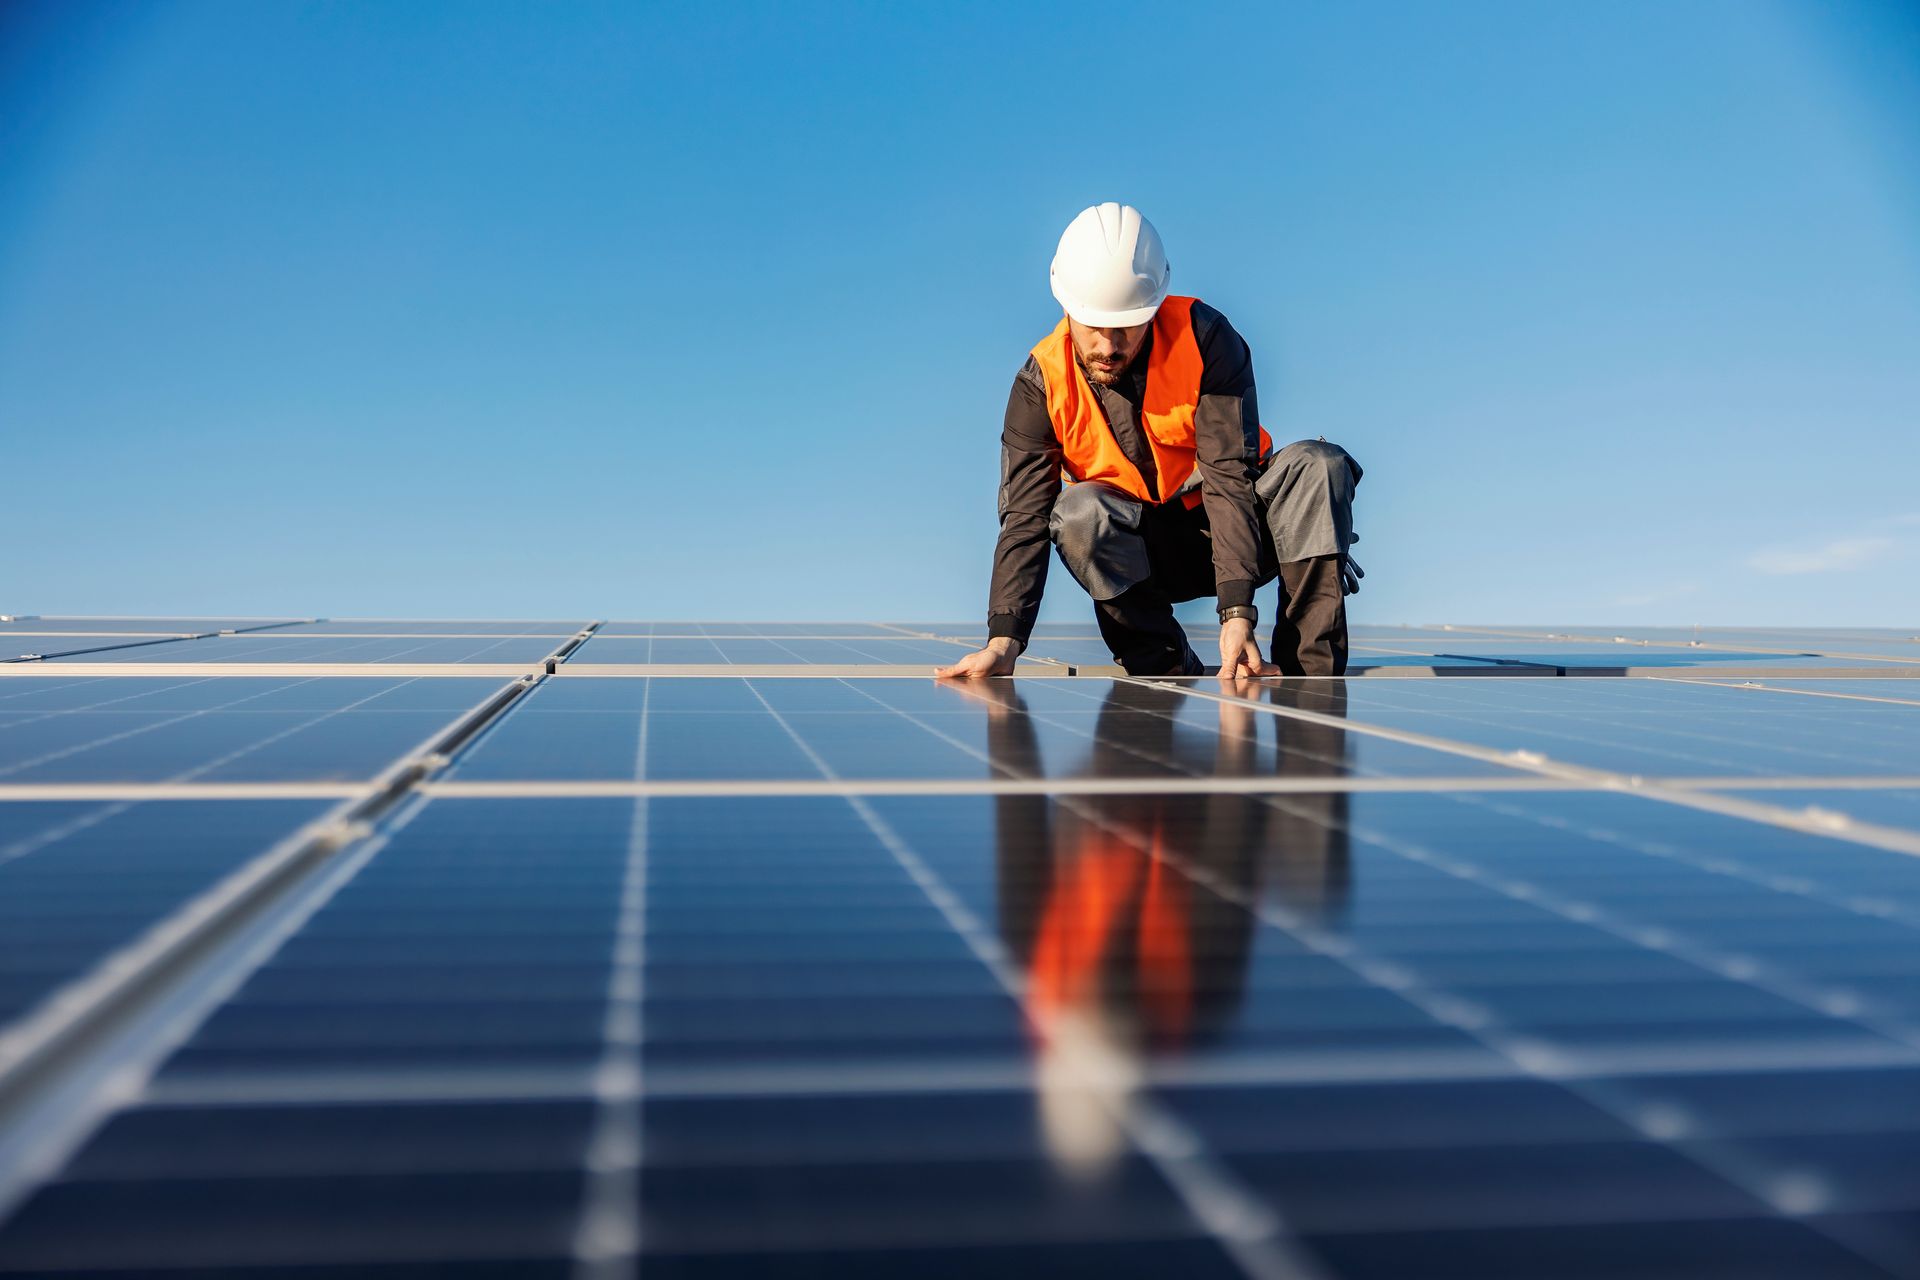 Harnessing the Sun Safely: Fire Protection in Photovoltaic System